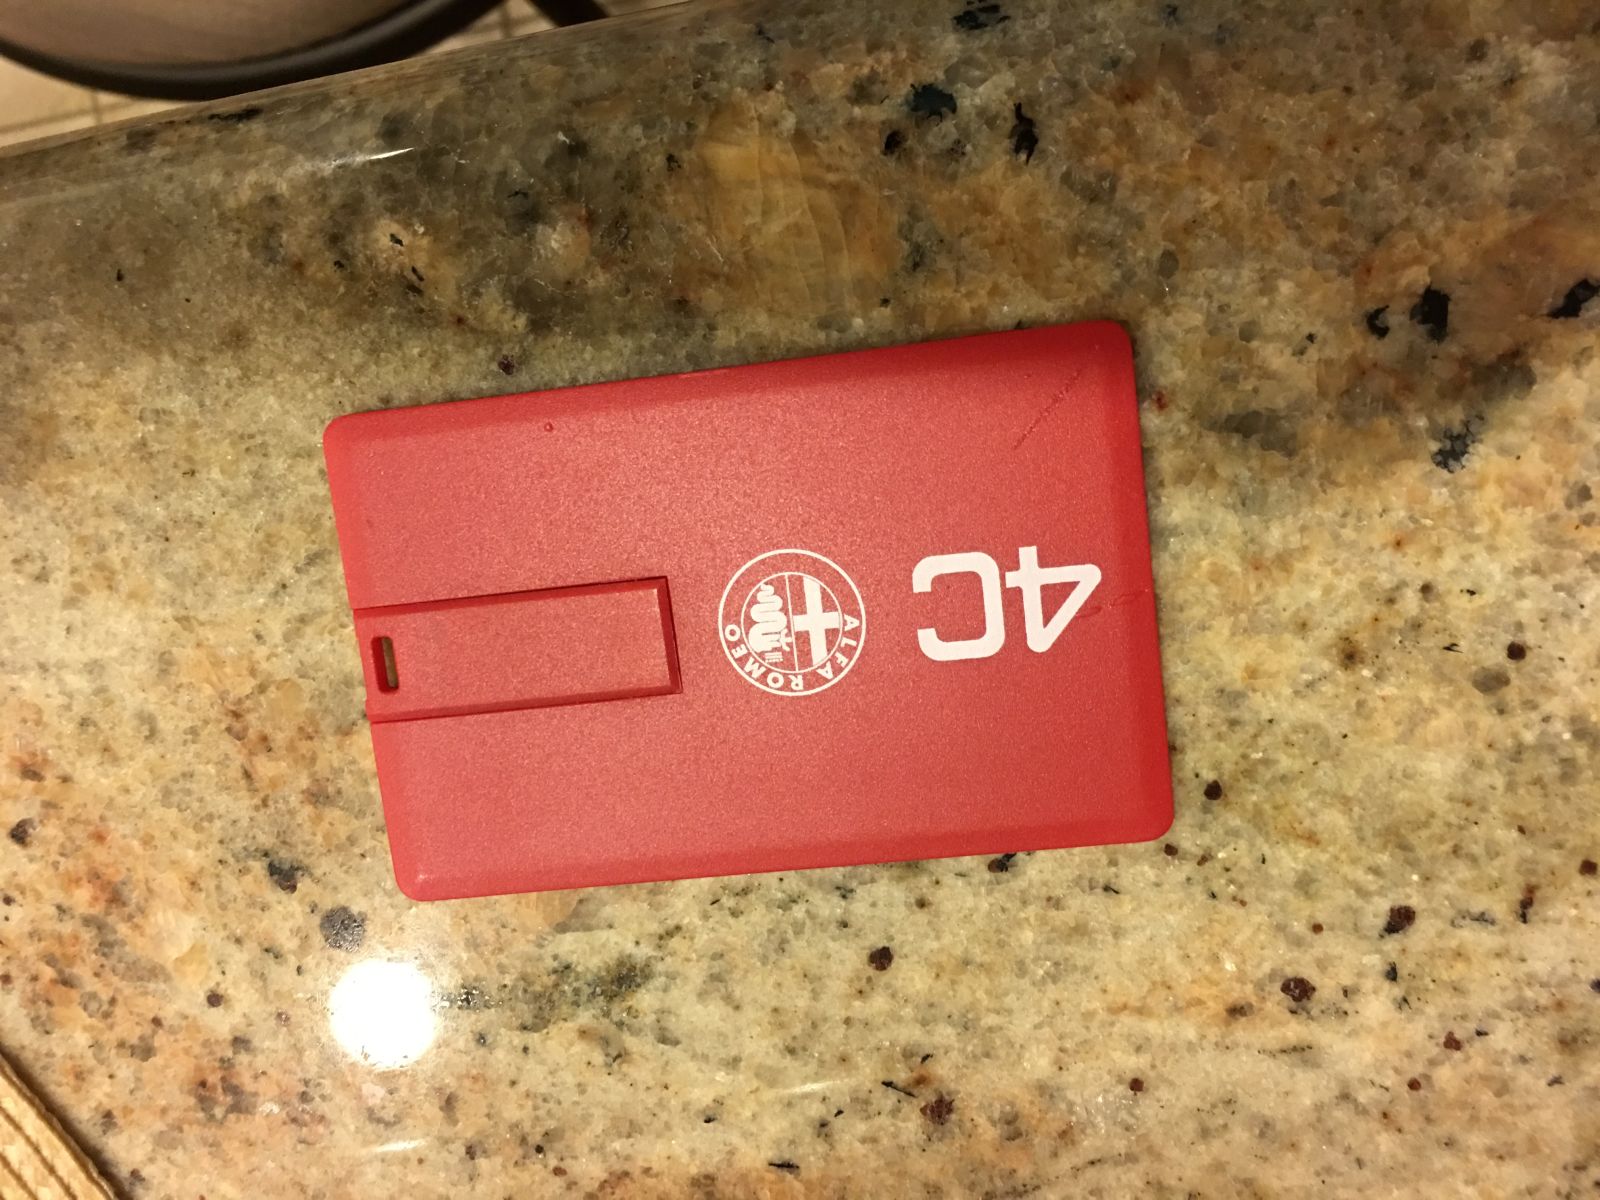 I found this stuck inside the inner cover. It took forever to pry out; the inner pouch had melted onto this plastic card. It took me several minutes to figure out that it rotates open and is actually a USB drive containing promotional videos.